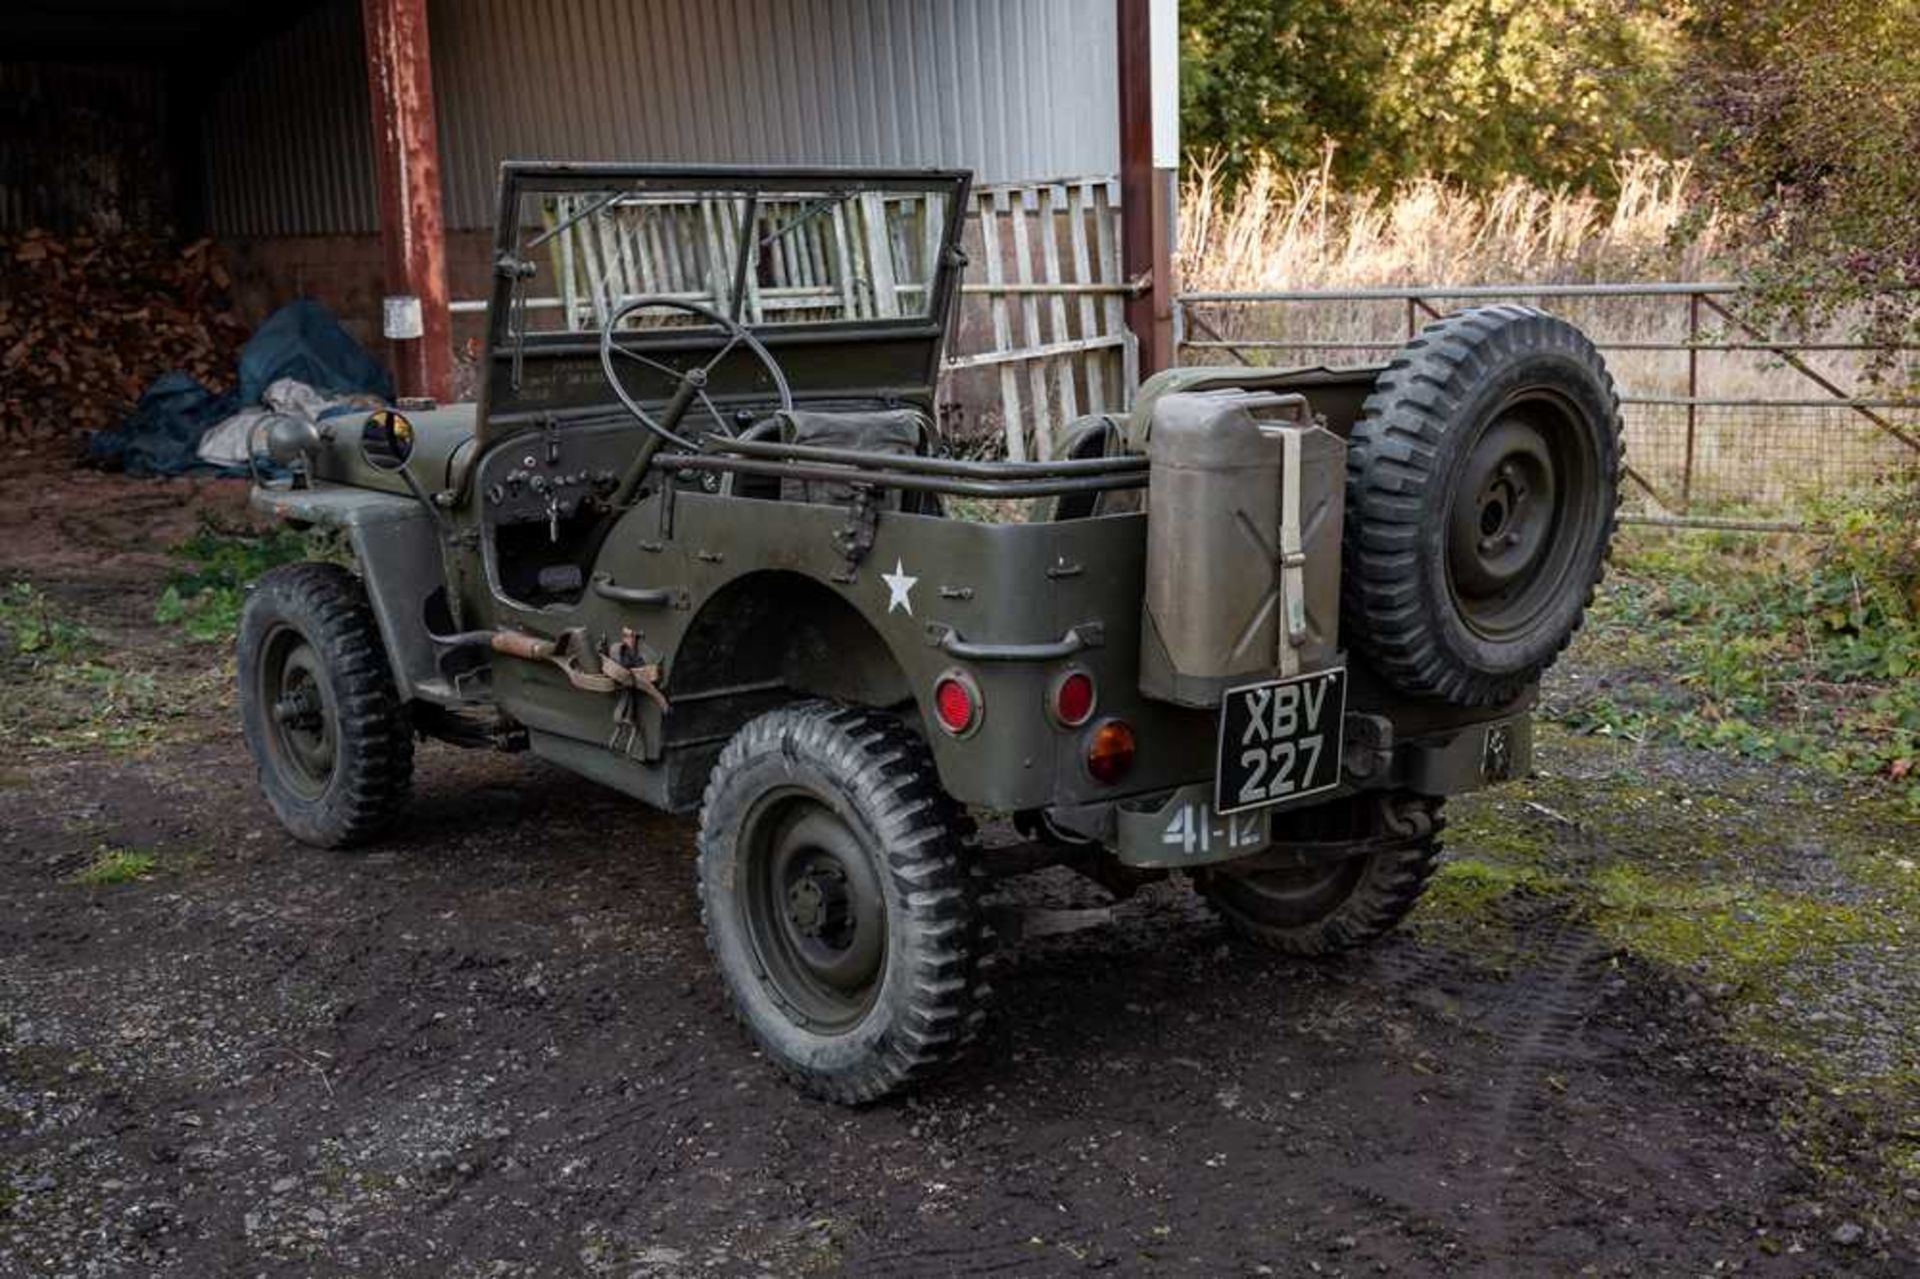 1943 Ford GPW Jeep Formerly the Property of Oscar Winner Rex Harrison - Image 71 of 88